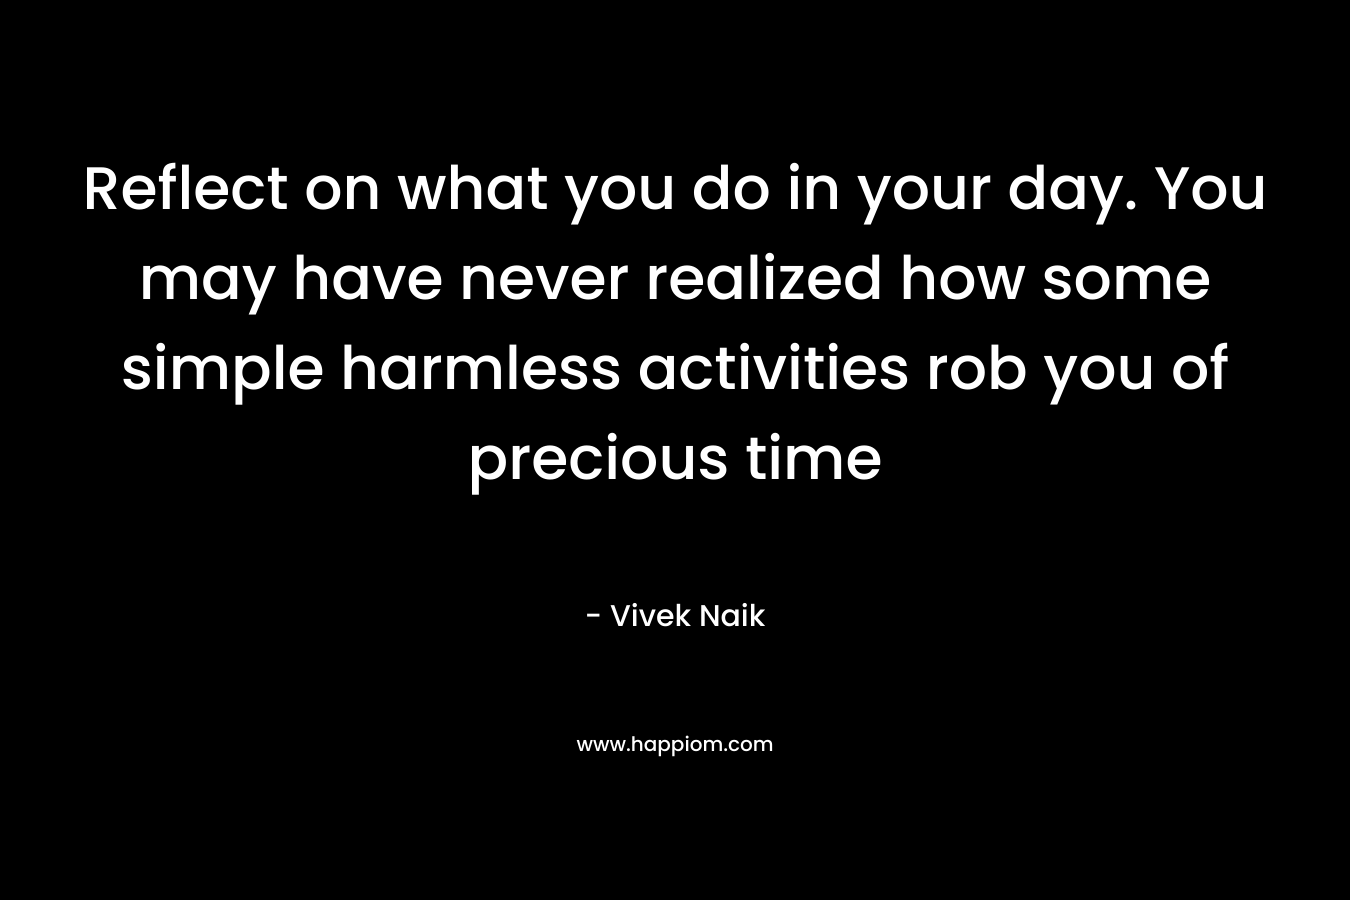 Reflect on what you do in your day. You may have never realized how some simple harmless activities rob you of precious time – Vivek Naik